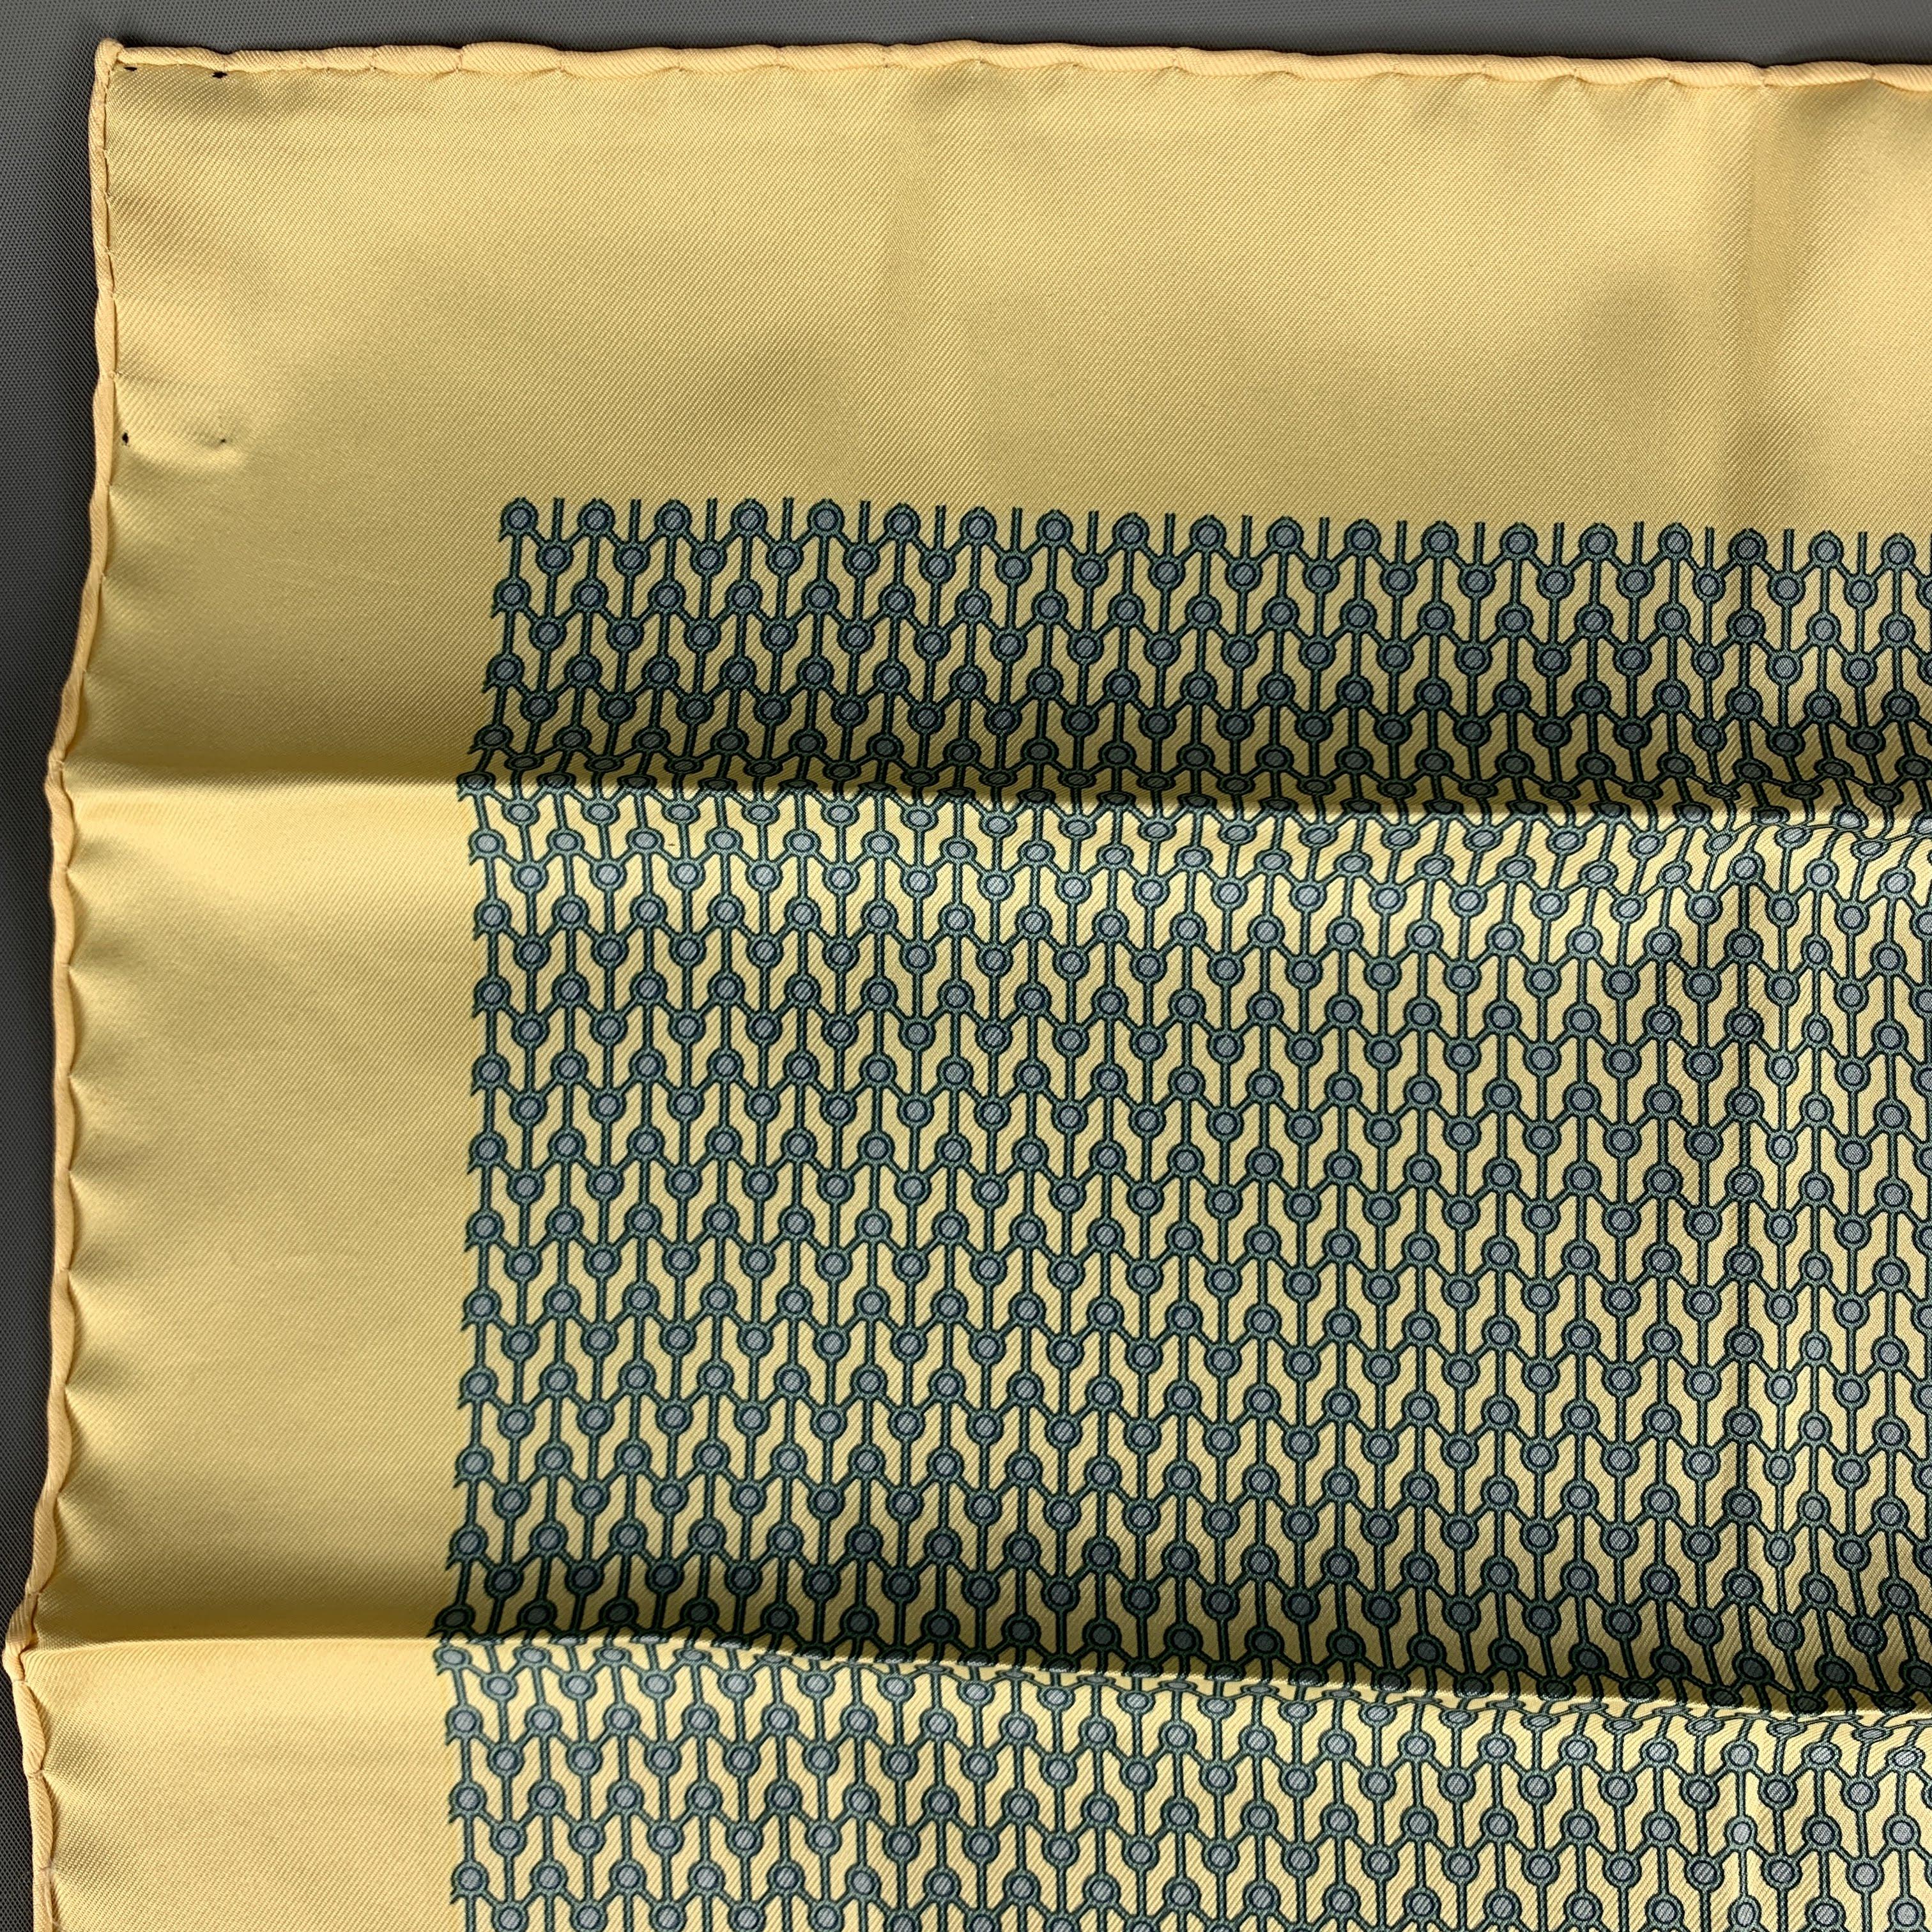 Vintage HERMES Pocket Square comes in a yellow and blue silk, with all over abstract geometric print. Made in France.
 
Excellent Pre-Owned Condition.
 
16.5 x 16.5 in.